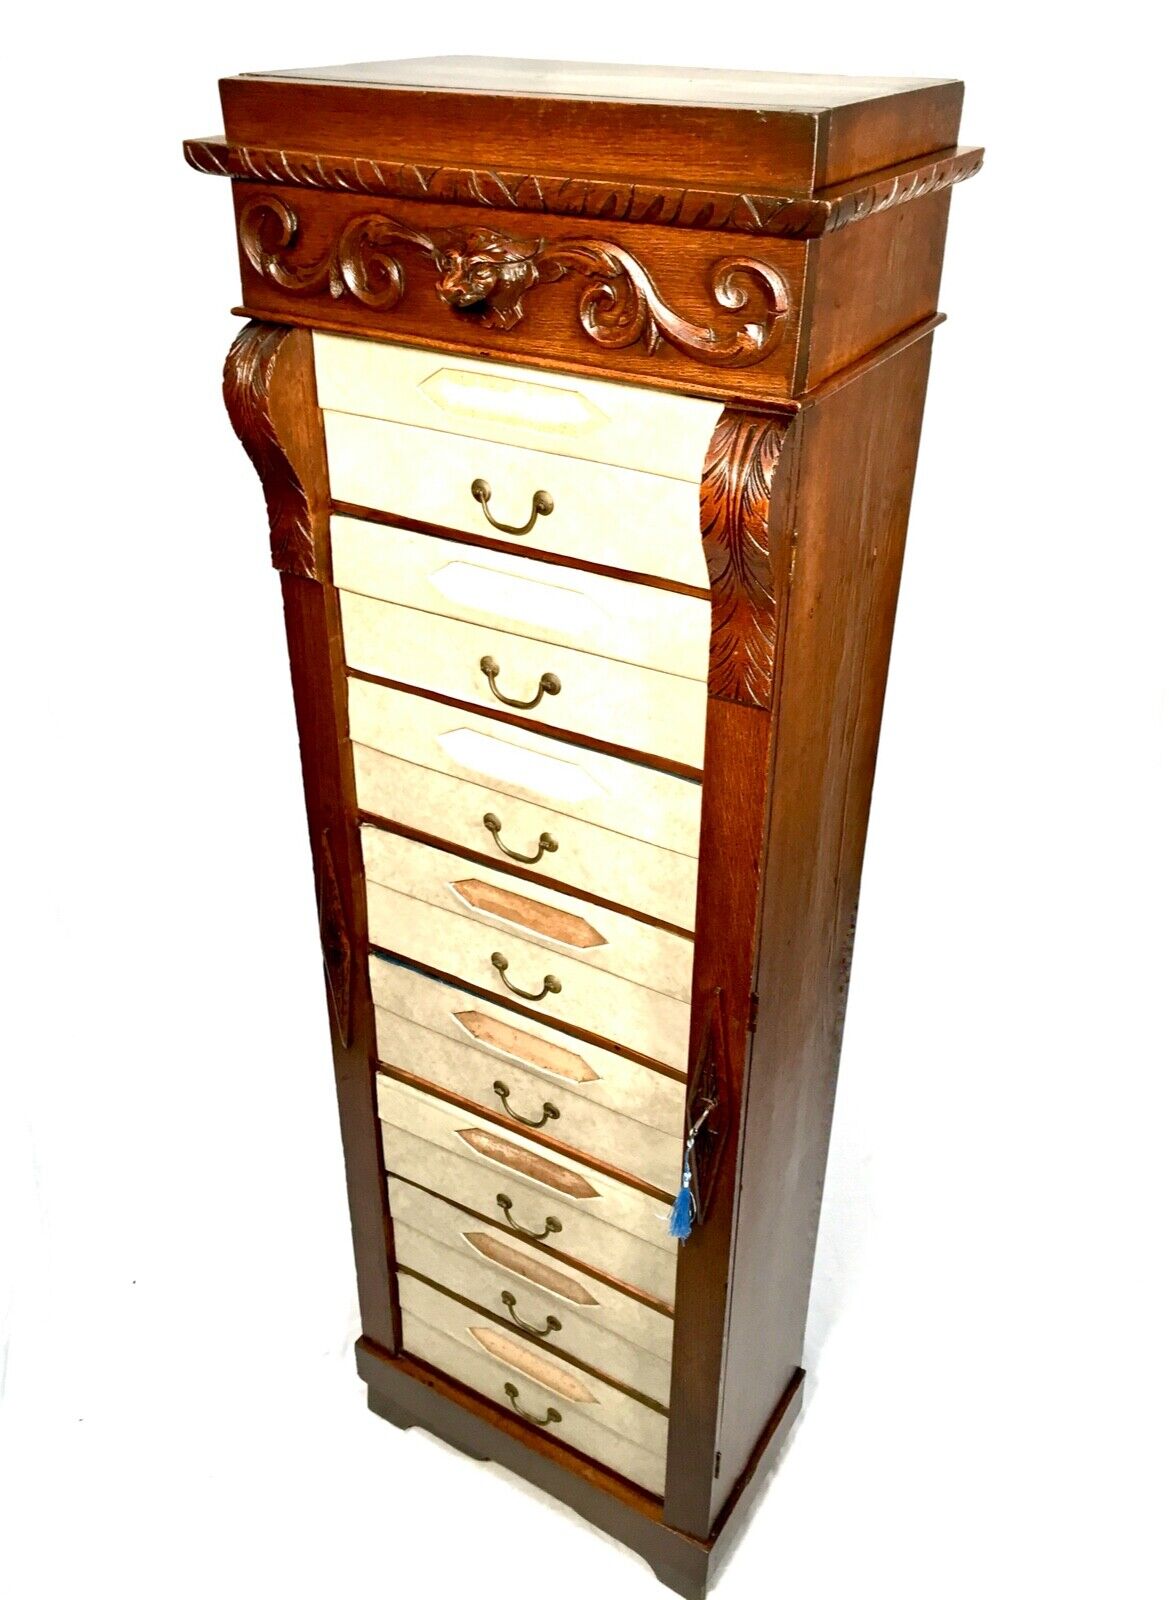 Antique Oak French Filing Cabinet / Chest of Drawers / Cartonnier / 19th Century